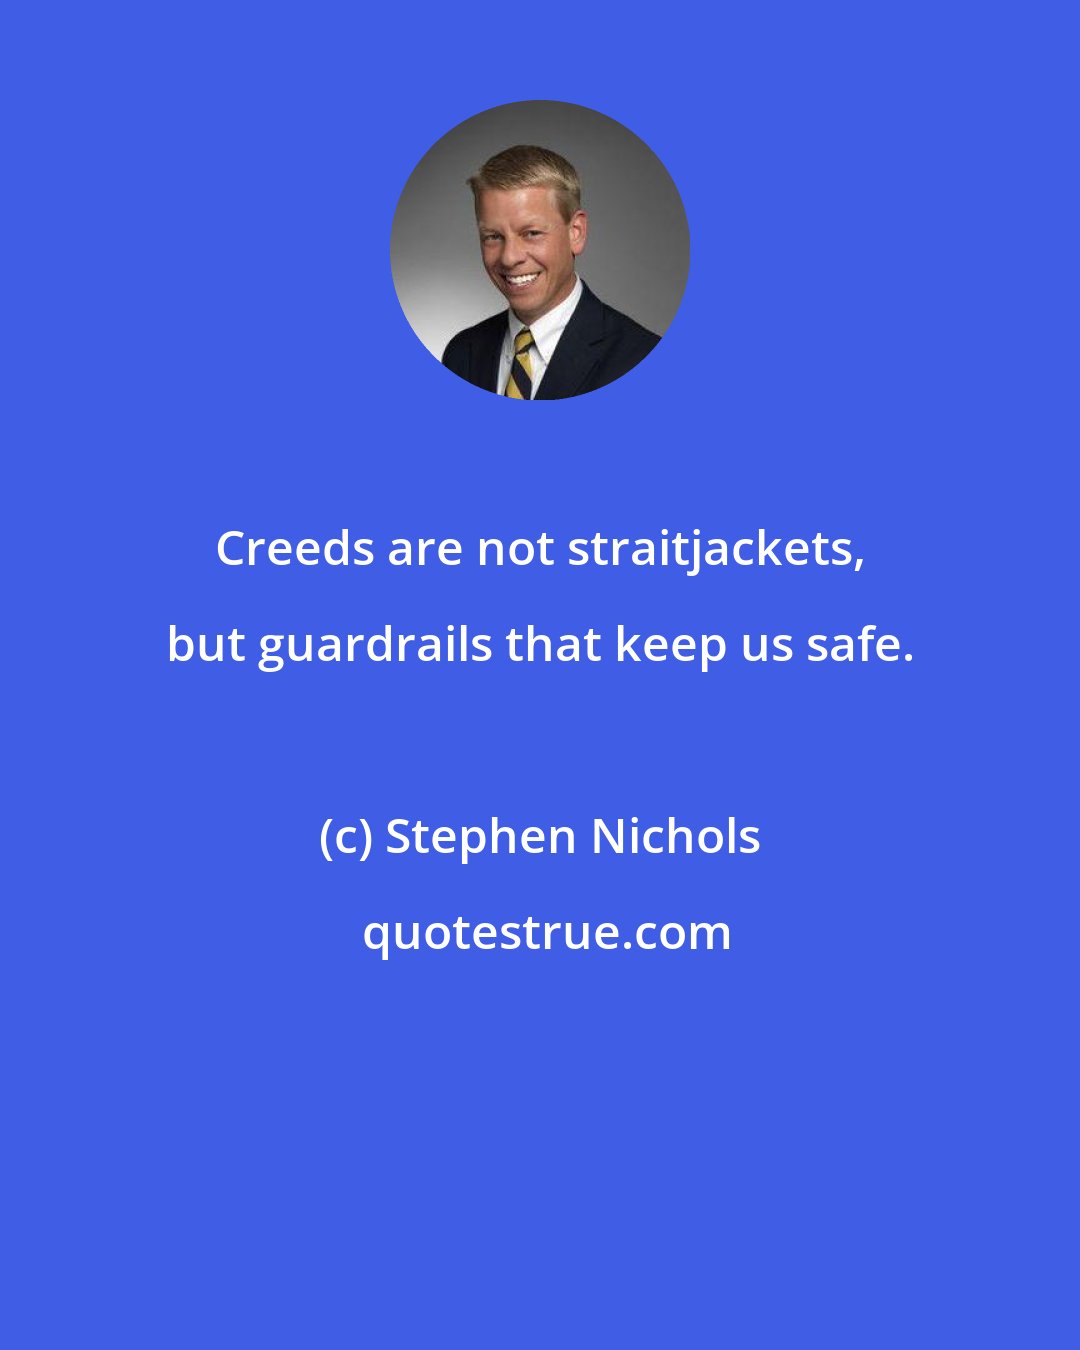 Stephen Nichols: Creeds are not straitjackets, but guardrails that keep us safe.